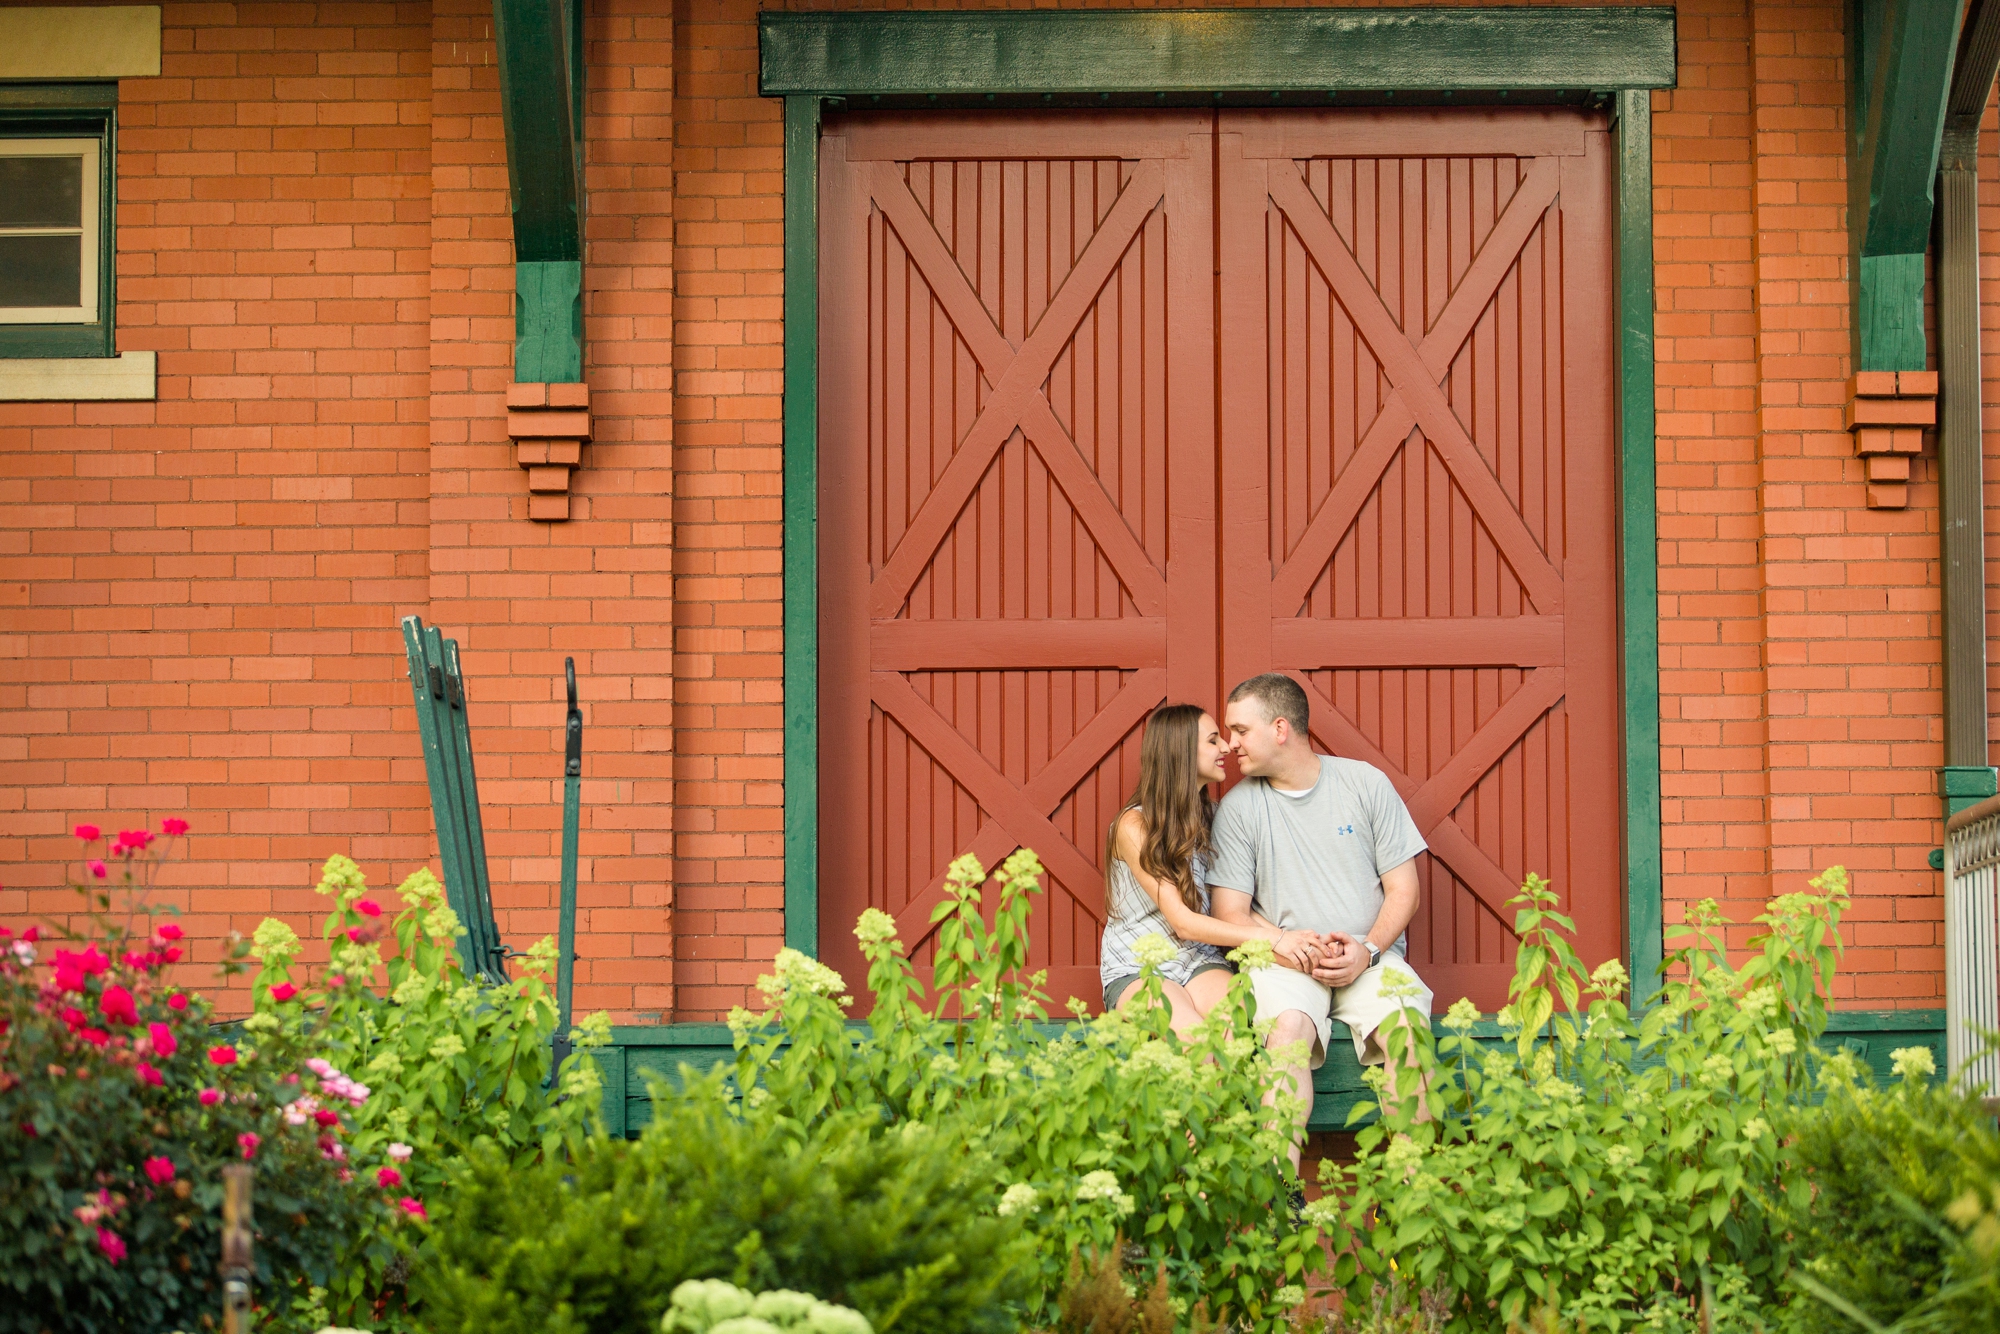 downtown beaver pa engagement photos, downtown beaver pa wedding photos, best location for photoshoot in pittsburgh, pittsburgh wedding photographer